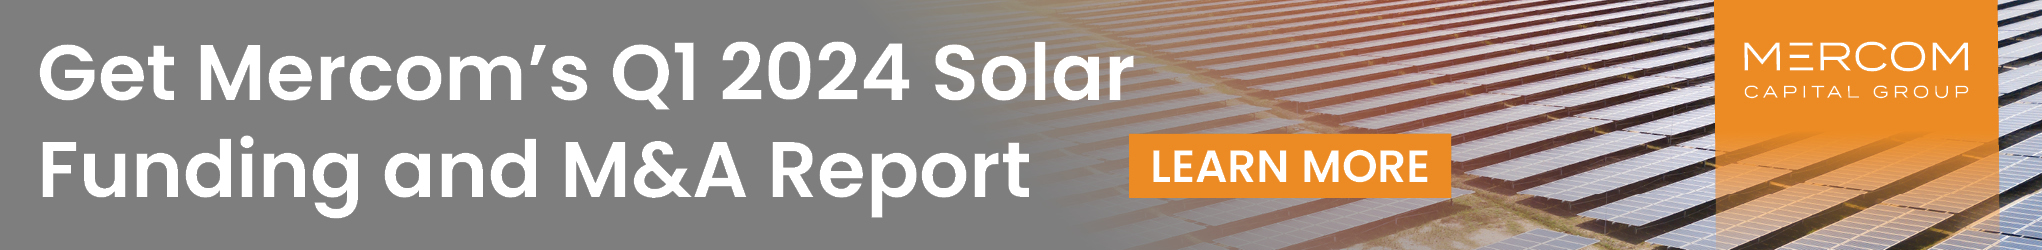 Q1 2024 Solar Funding and M&A Report